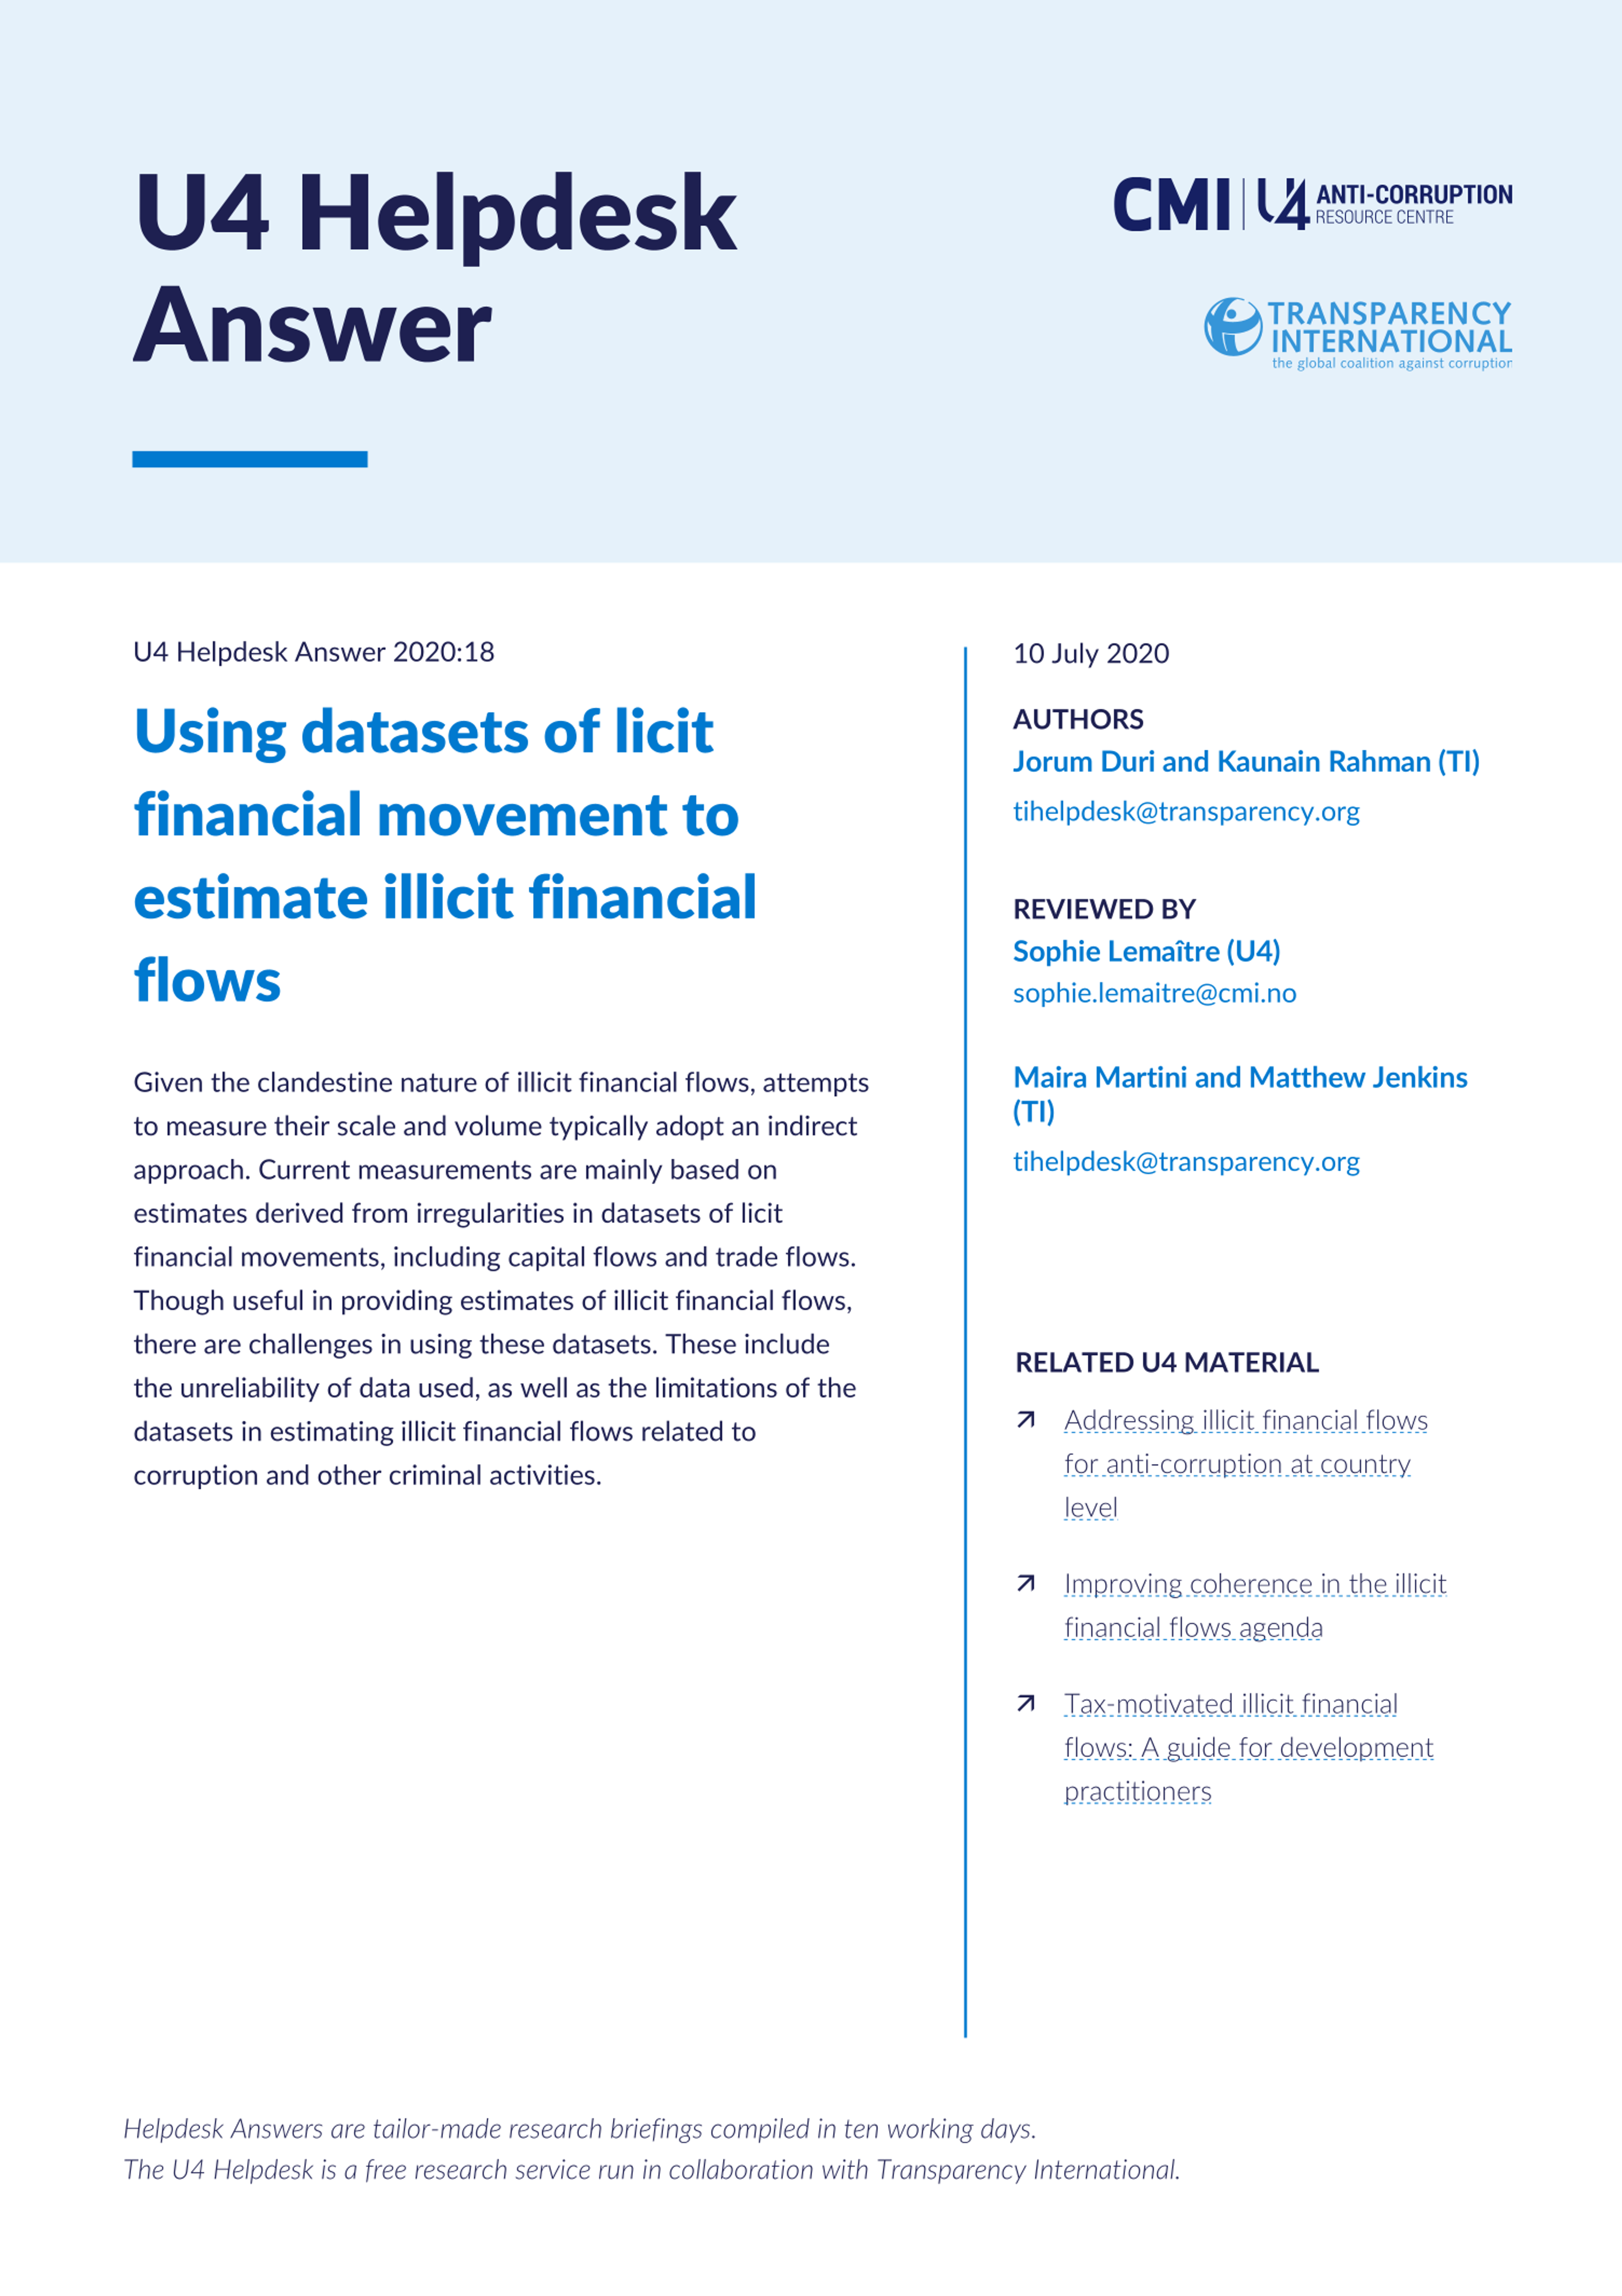 Using datasets of licit financial movement to estimate illicit financial flows